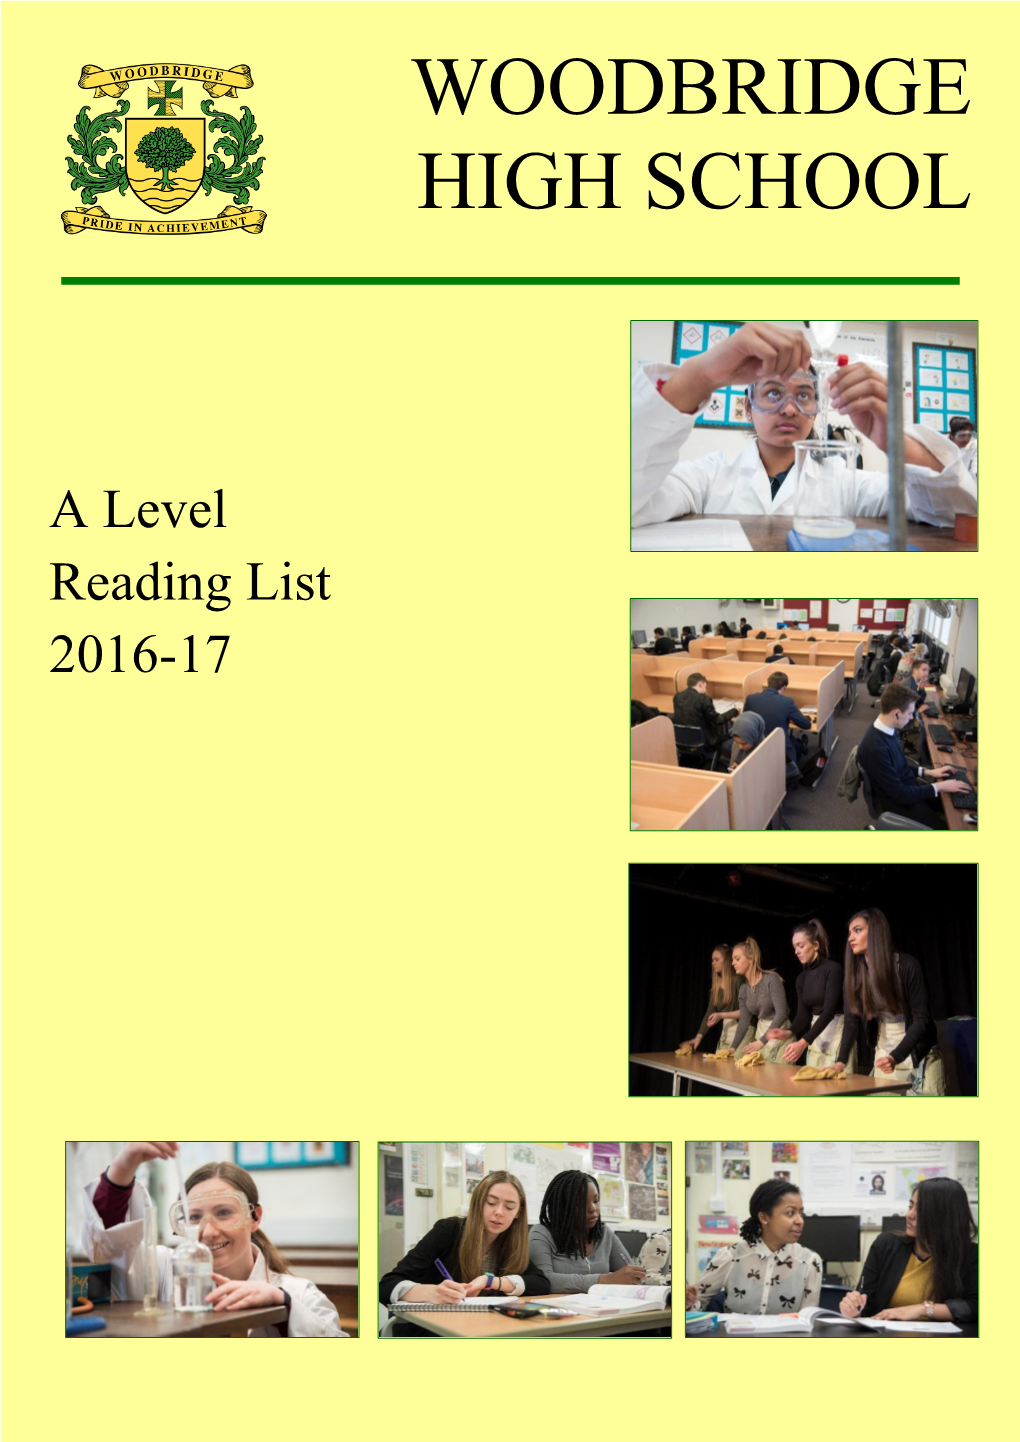 A Level Reading List 2016-17